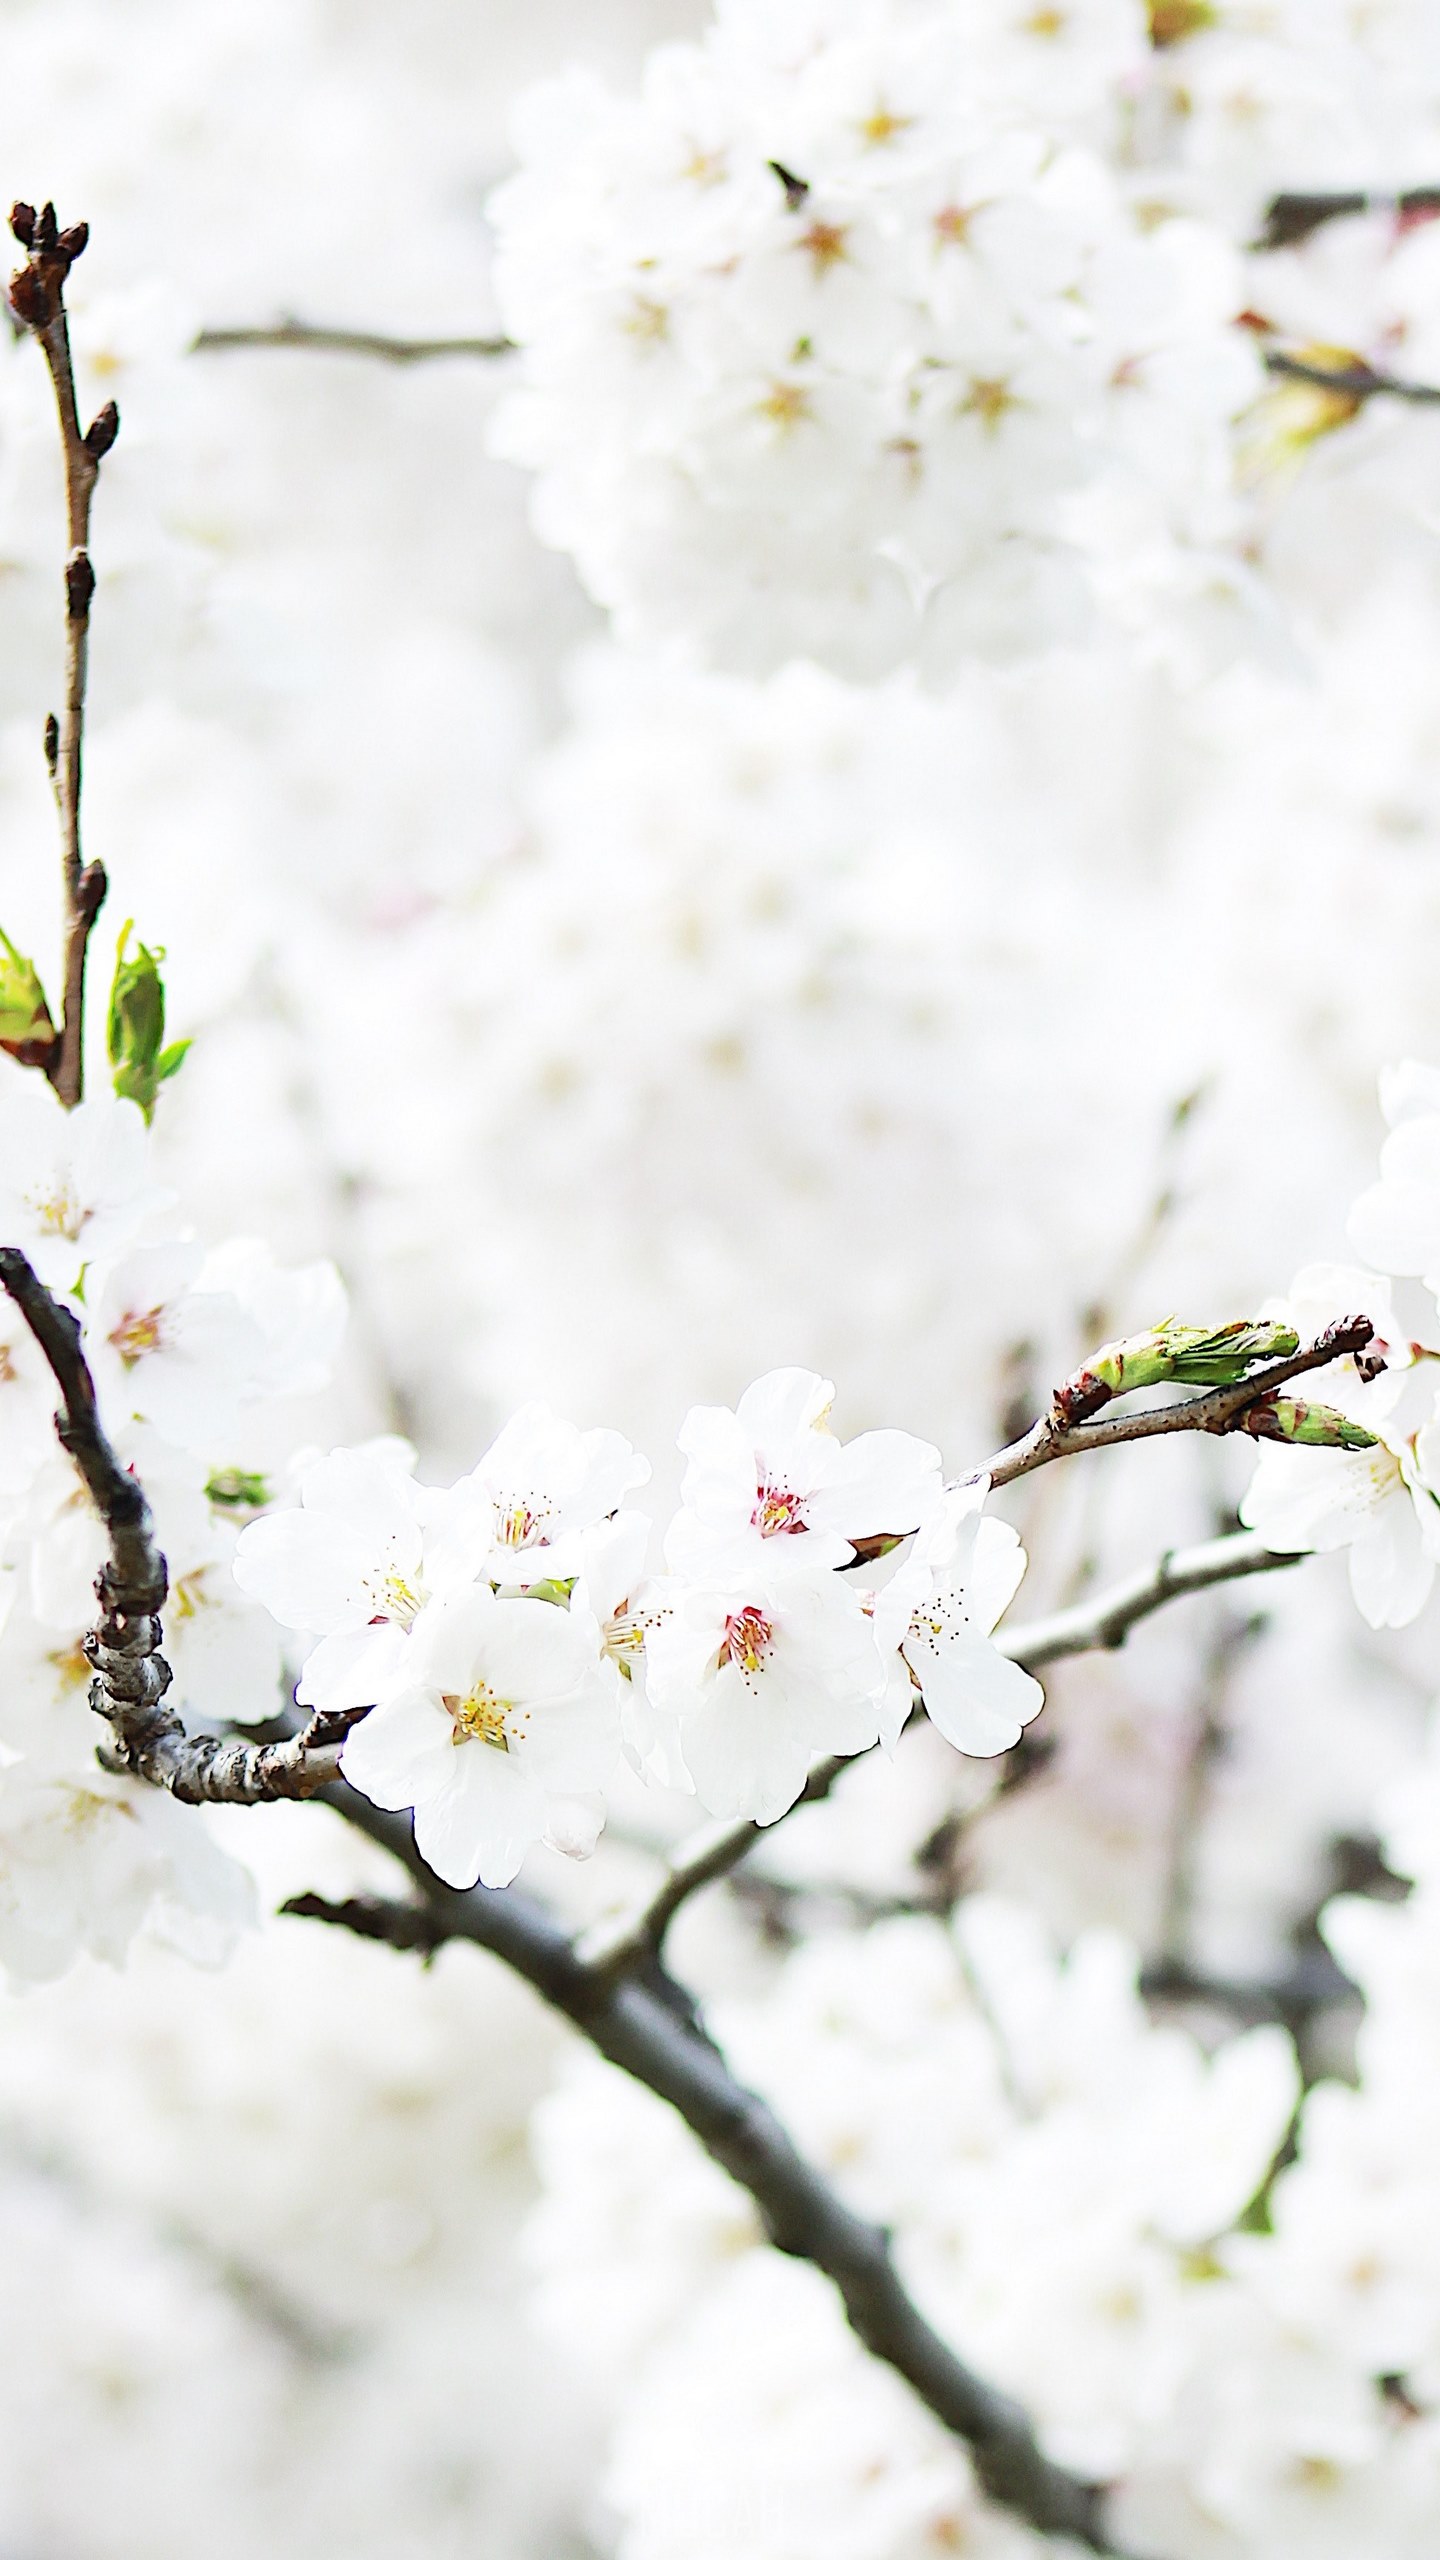 close up of cherry blossom branch in full bloom in spring high park, lost in white, Samsung Galaxy S7 wallpaper 1080p, 1440x2560 Gallery HD Wallpaper